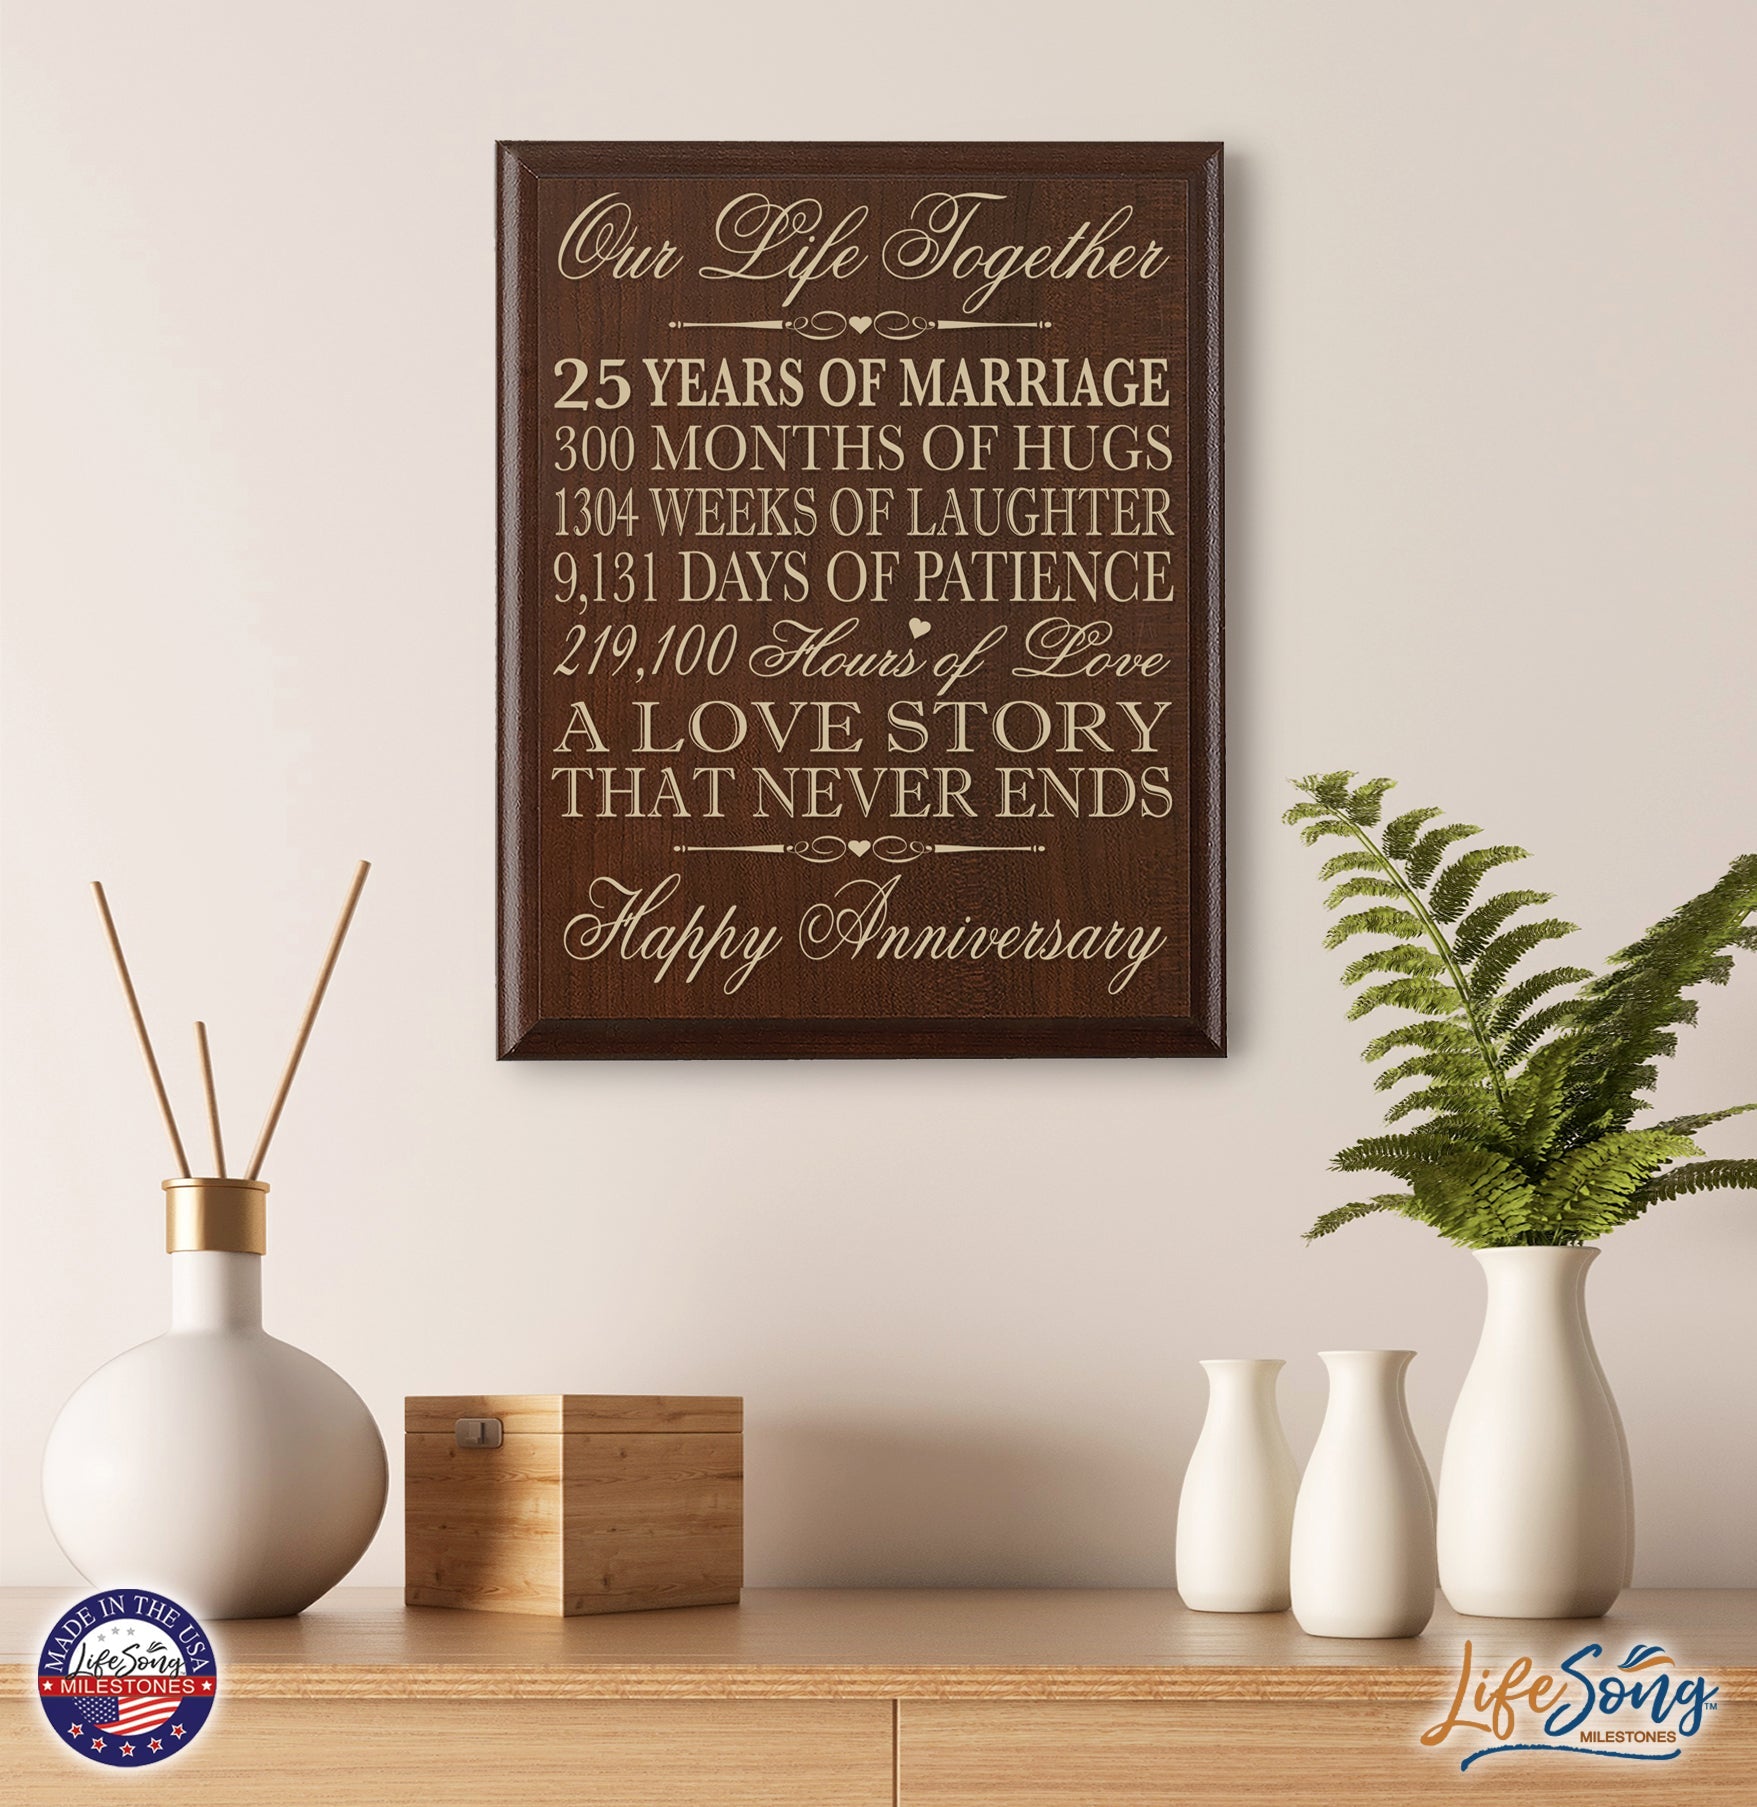 25th Wedding Anniversary Wall Plaque Gift "Our Life Together" - LifeSong Milestones